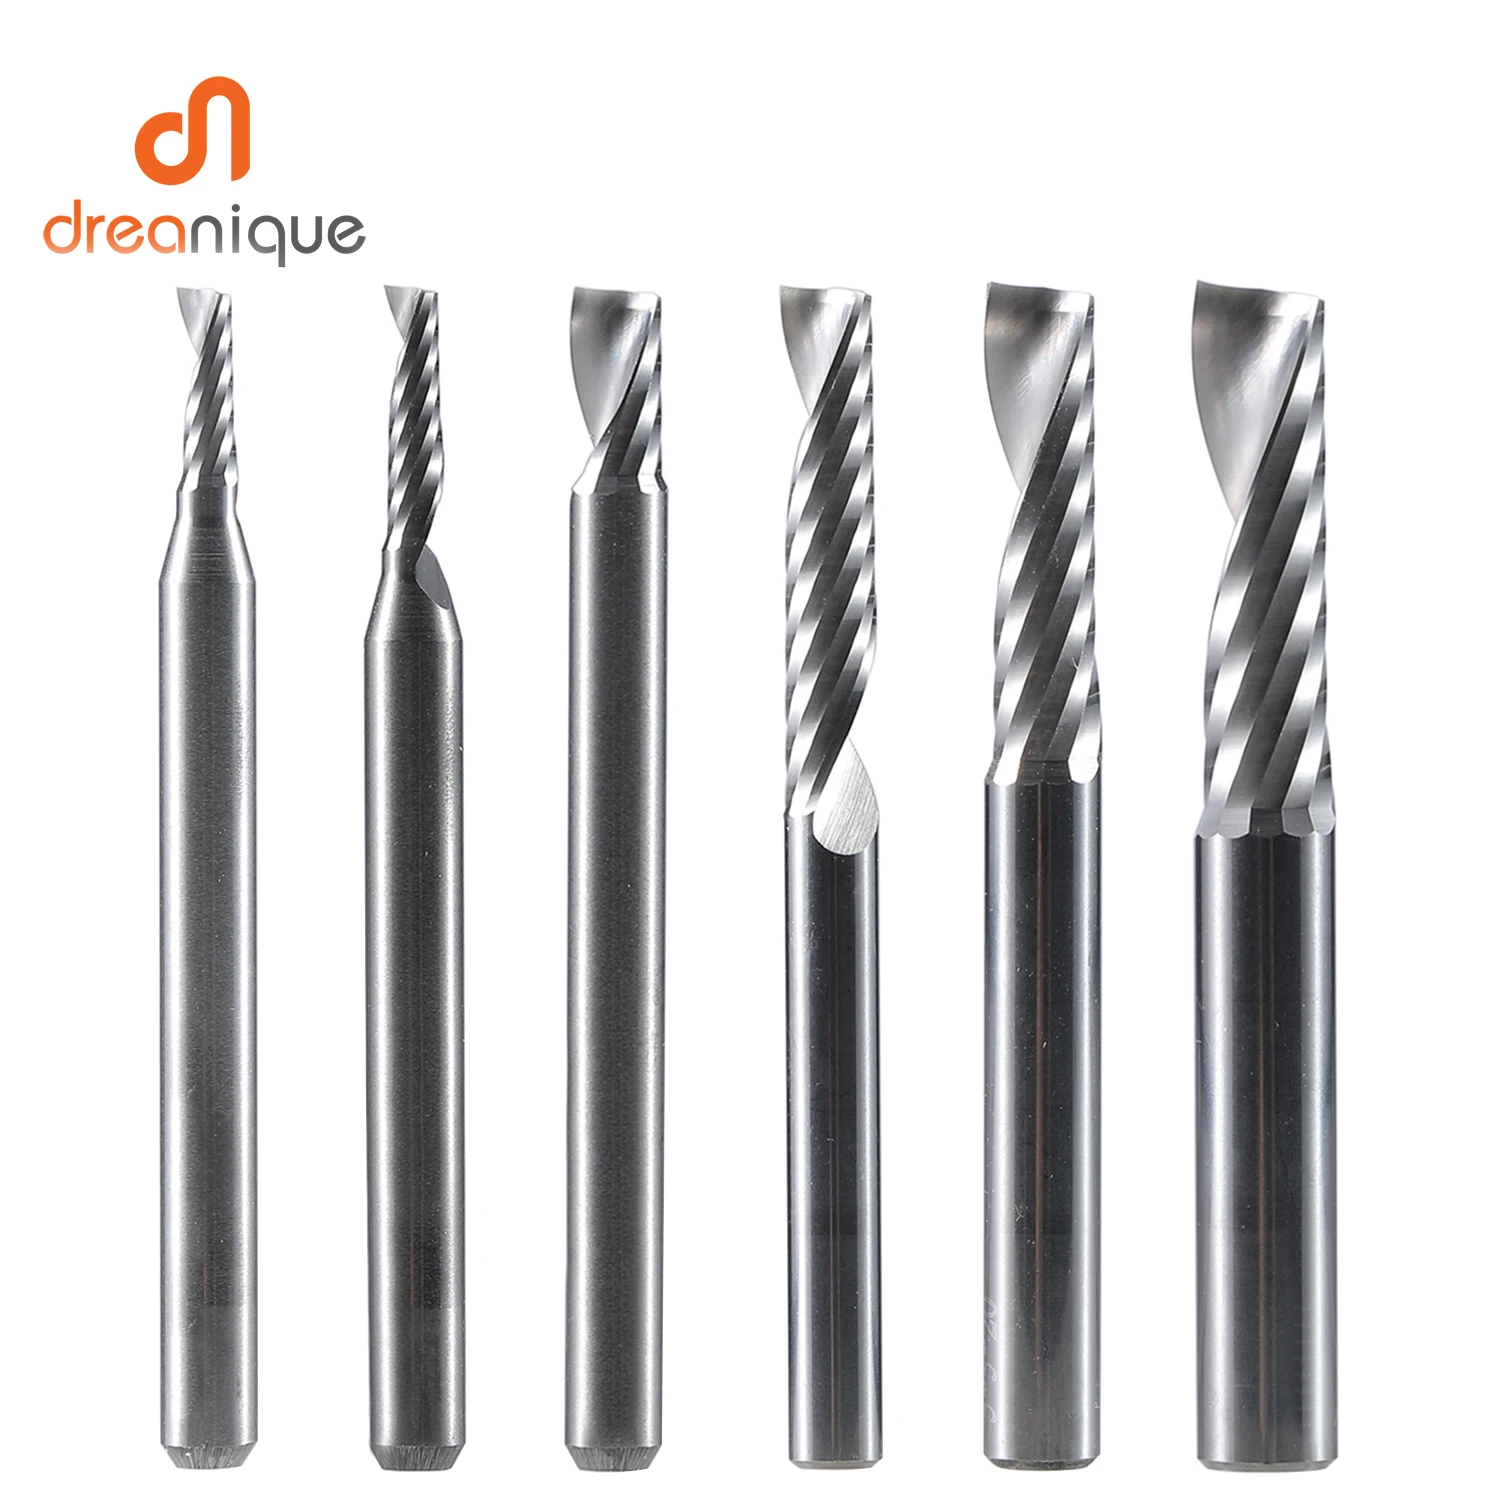 1pc AAAAA single flute spiral end mill 3.175 shank aluminum mill CNC 3D engraving carving bit for woodworking Acrylic ACM cut